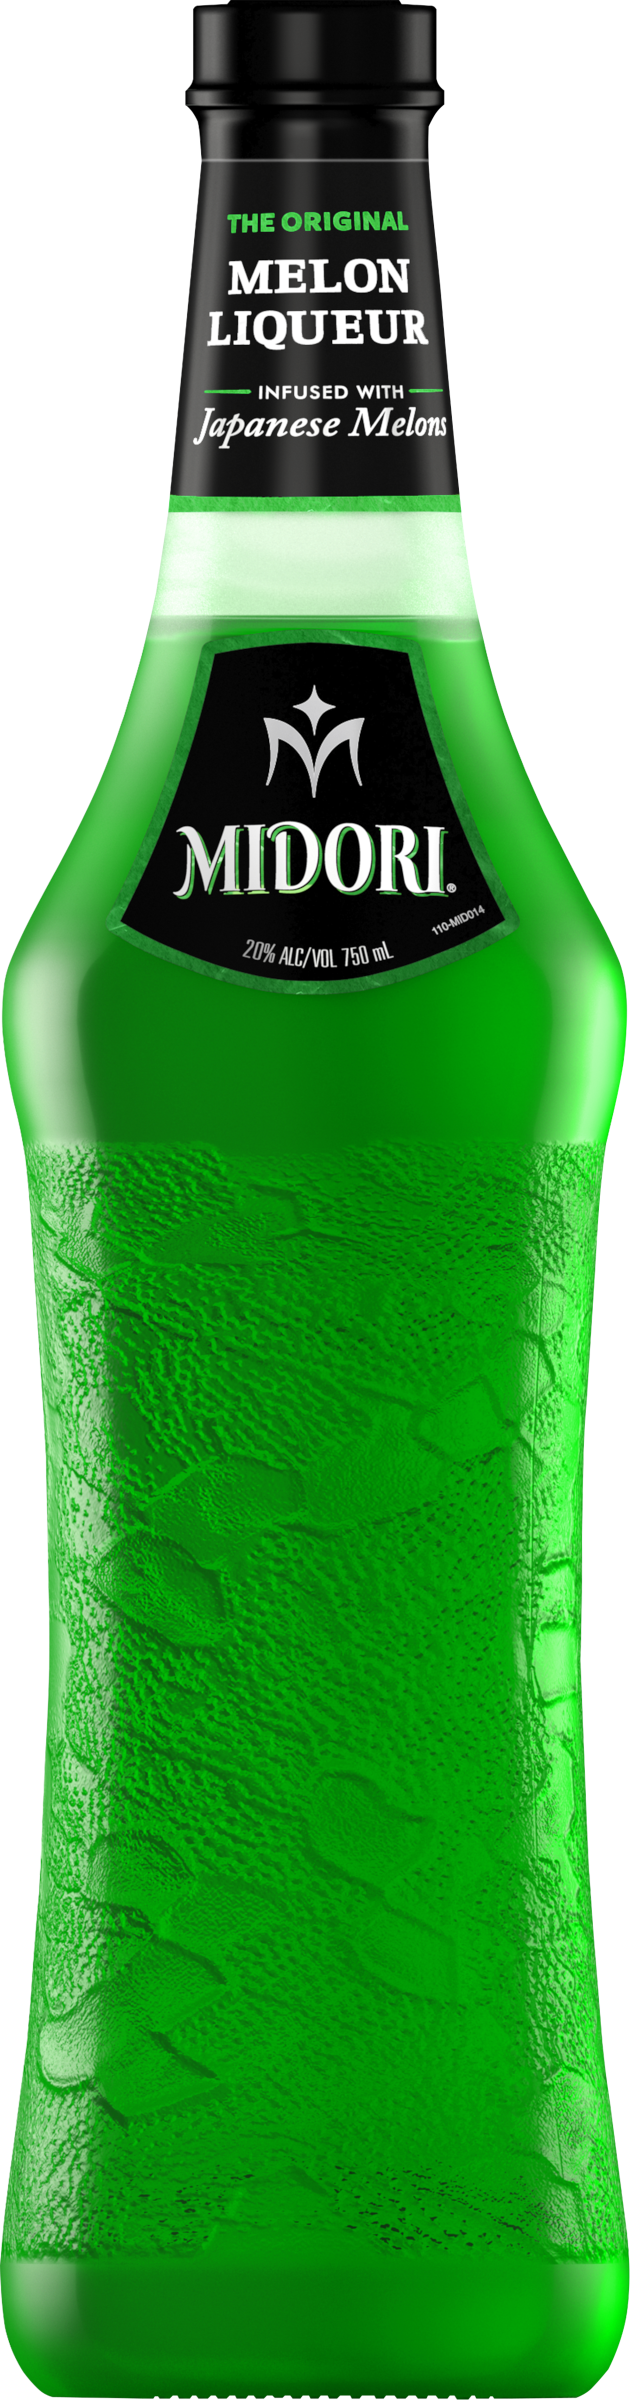 MIDORI Melon Liqueur, Buy Online for 2-5 Day Delivery